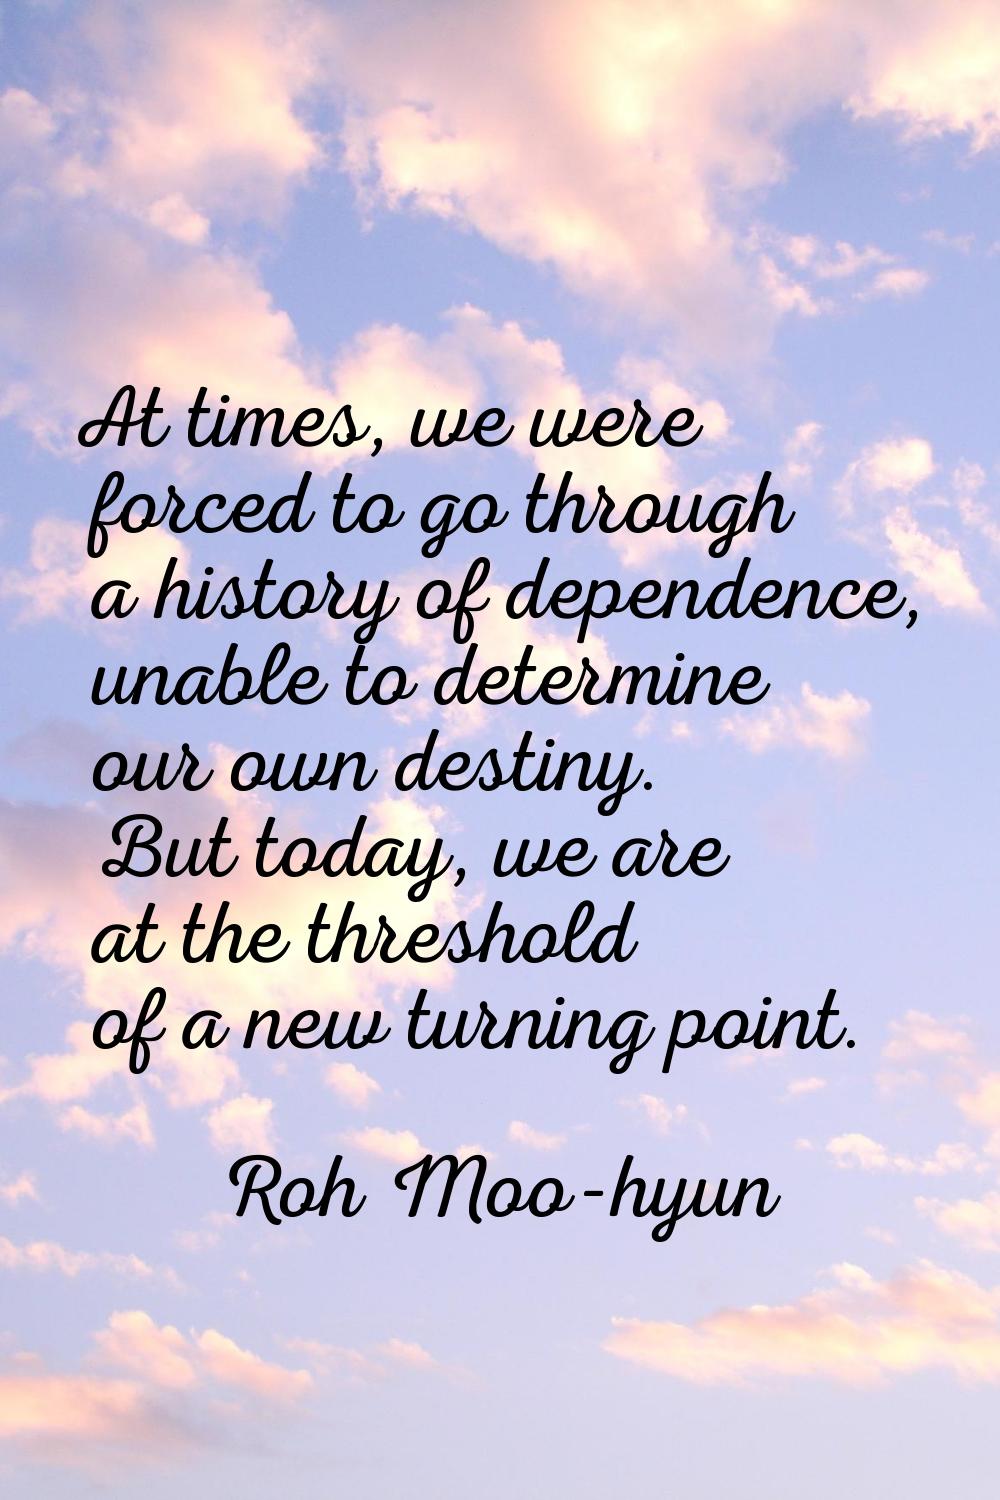 At times, we were forced to go through a history of dependence, unable to determine our own destiny